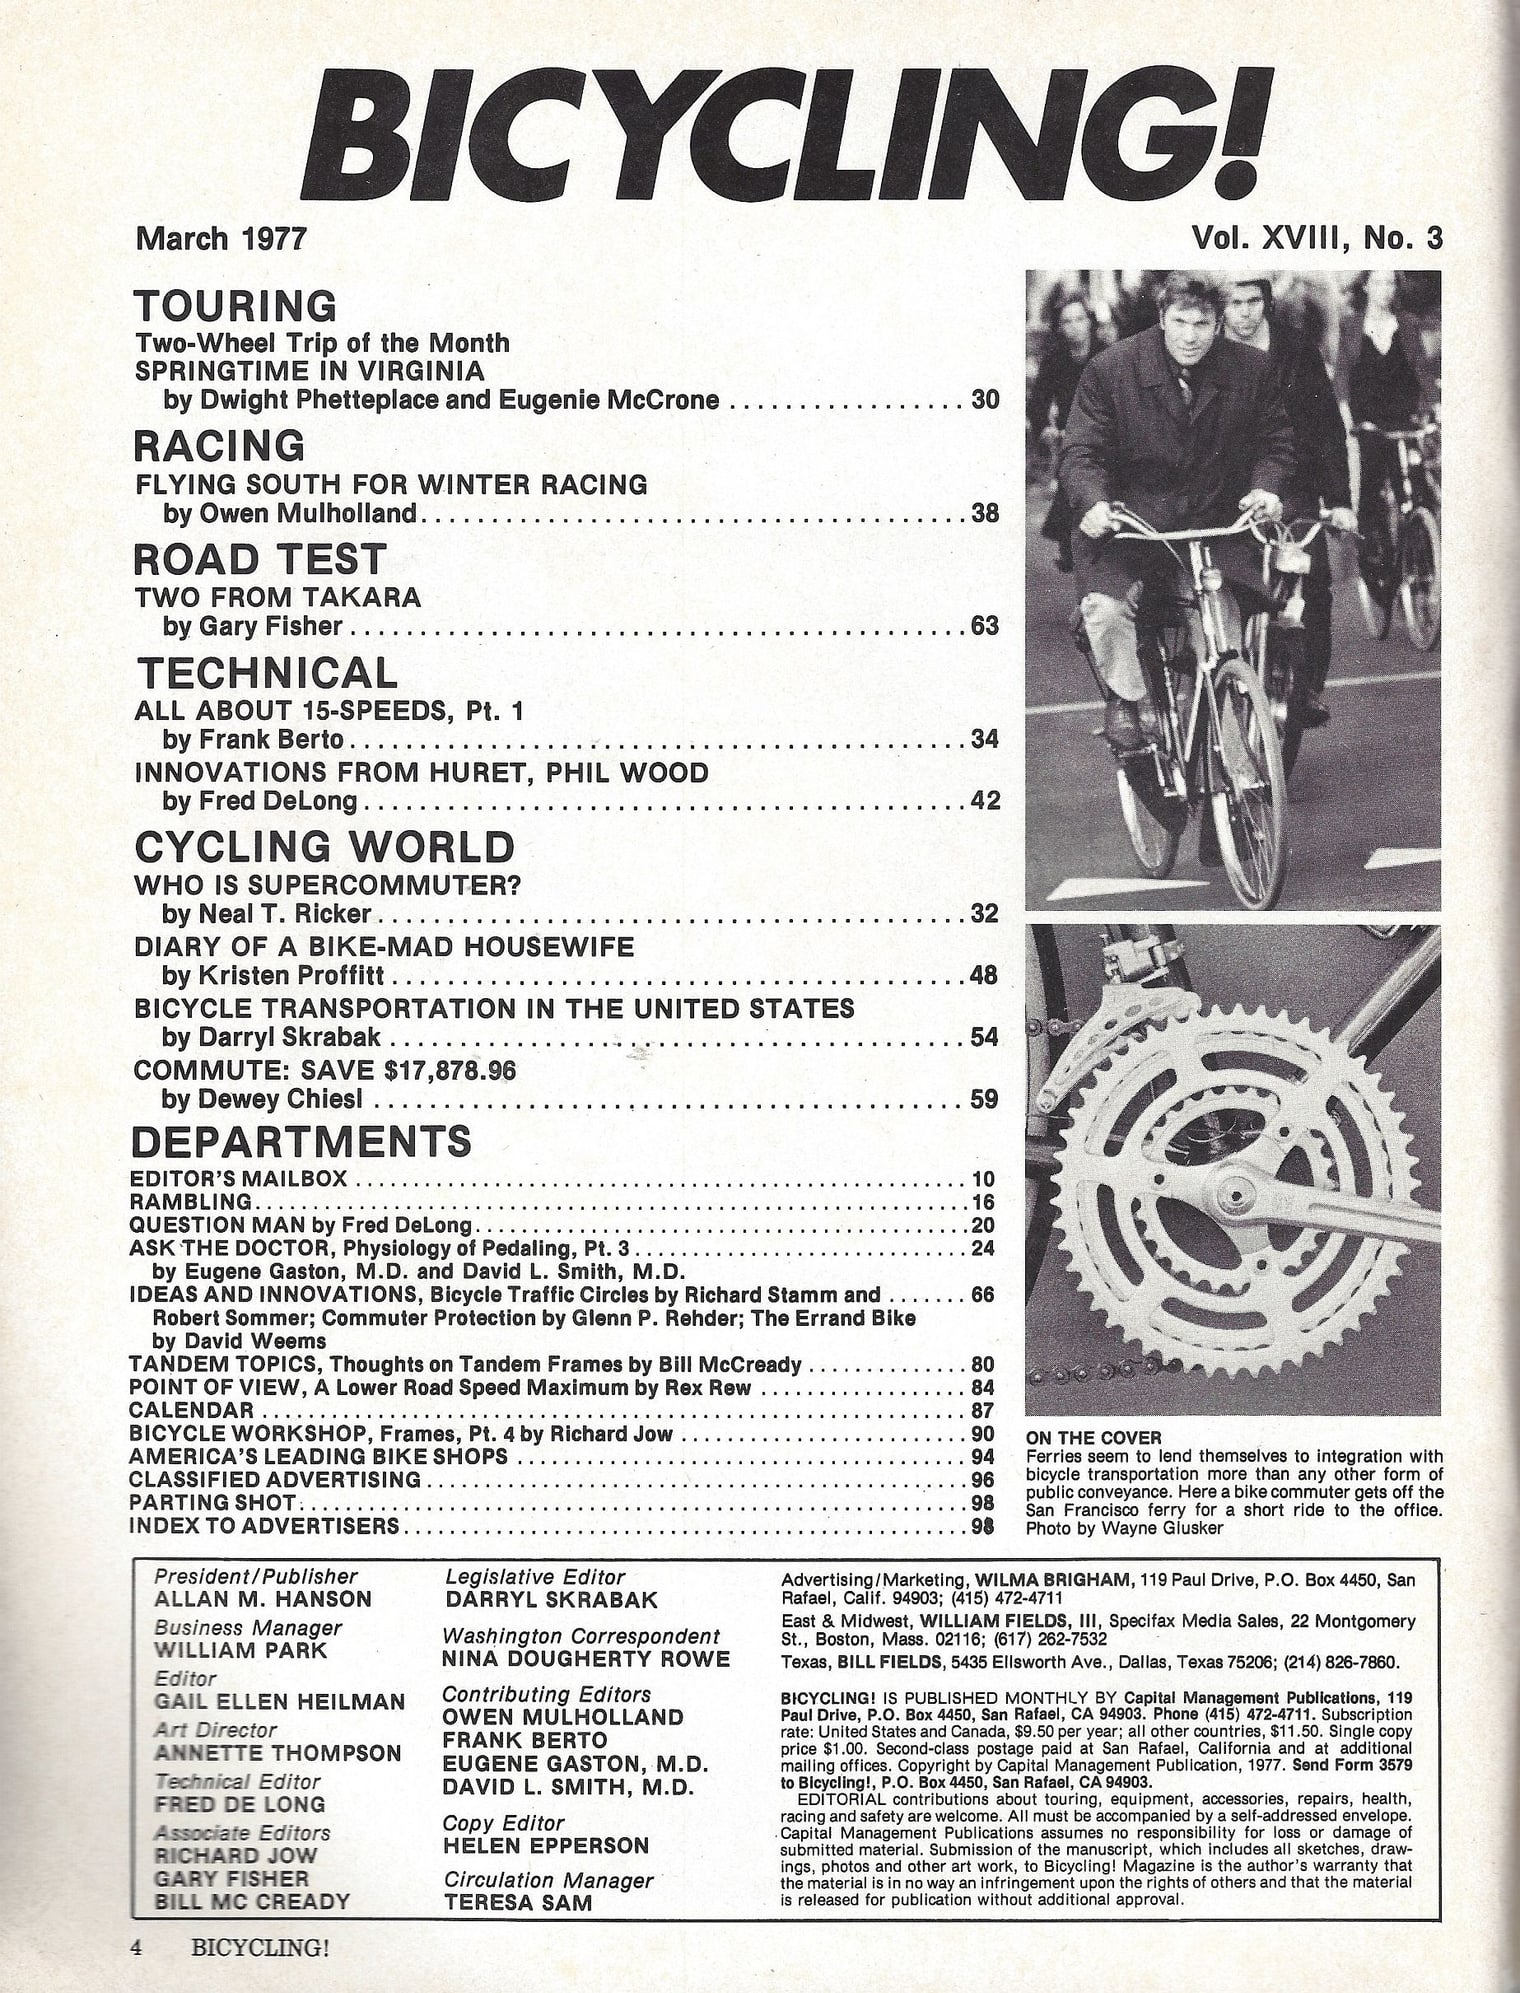 45 Years Ago: March 1977 in Bicycling! magazine - Bike Forums